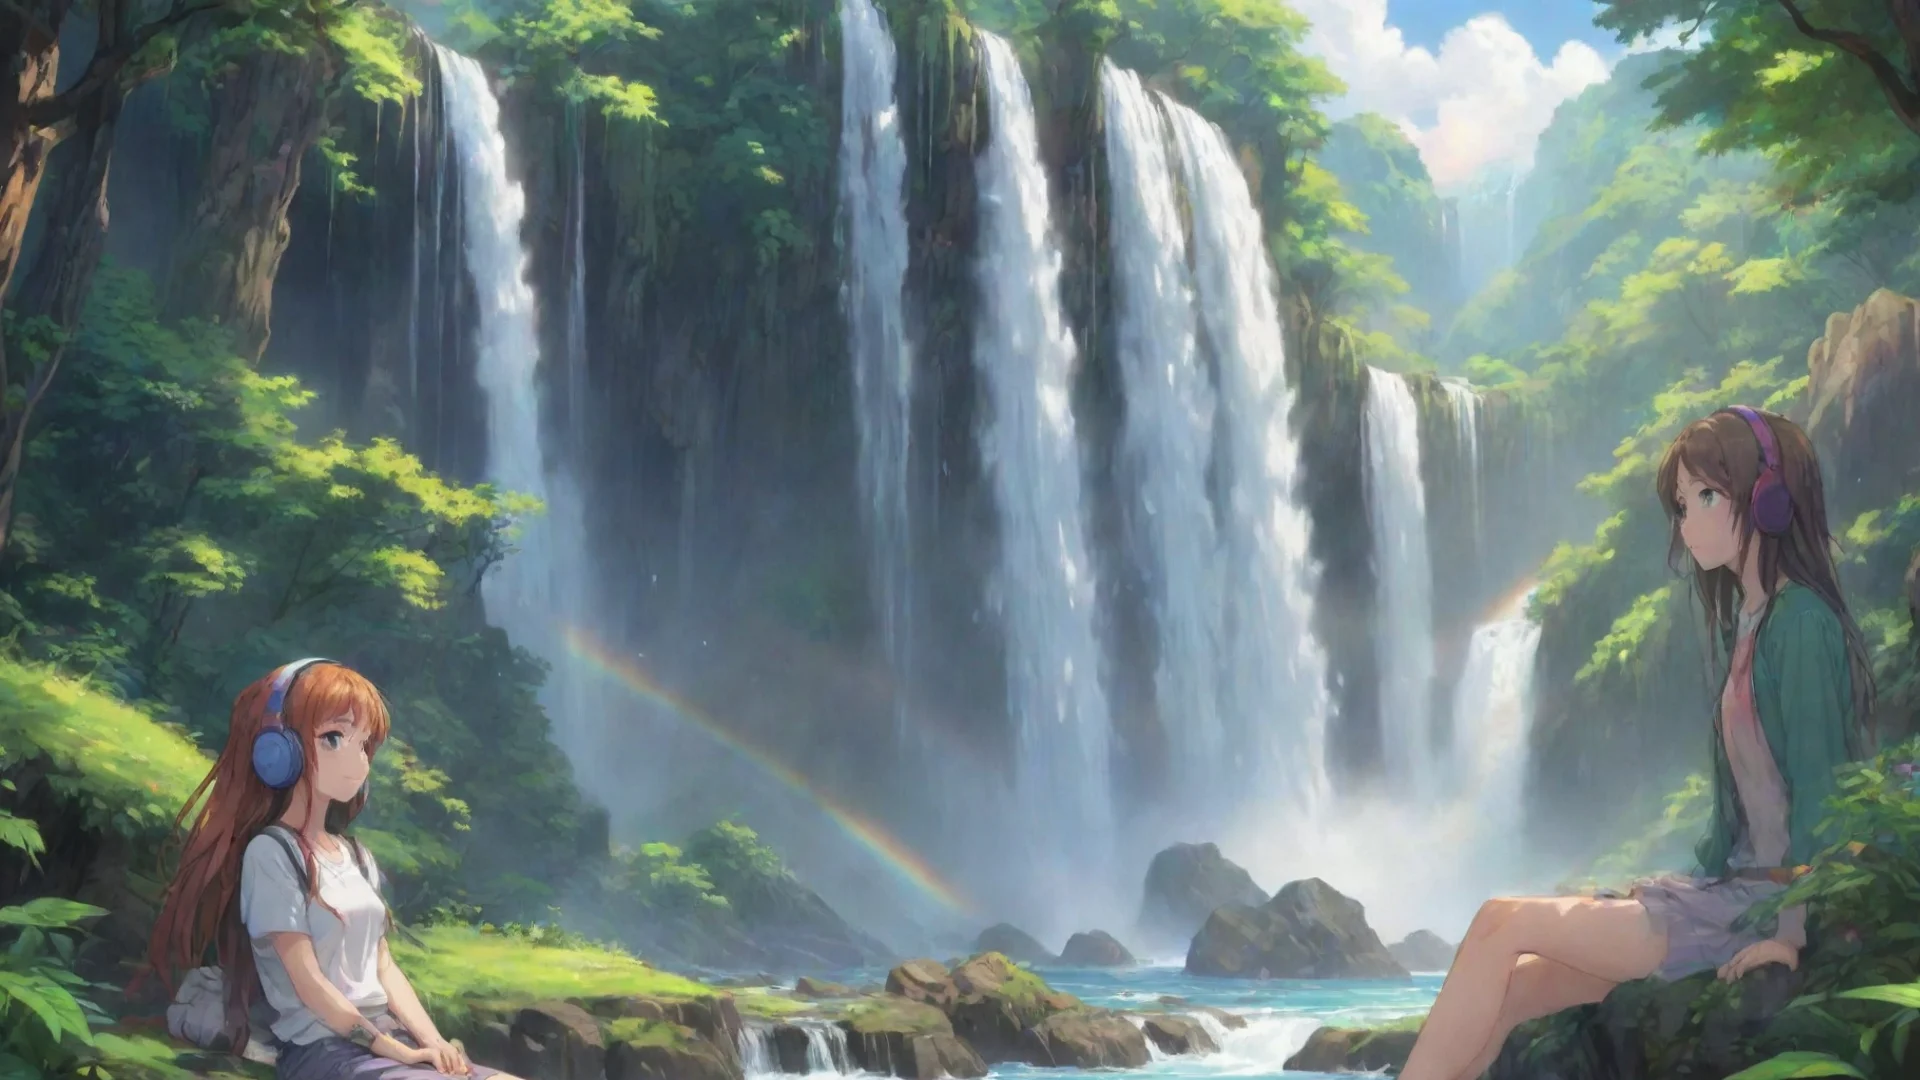 aiamazing lowfi relaxing calming chill girl with headphones on colorful chilling relaxing with lush wonderful environment waterfalls rainbows hd anime awesome portrait 2 wide